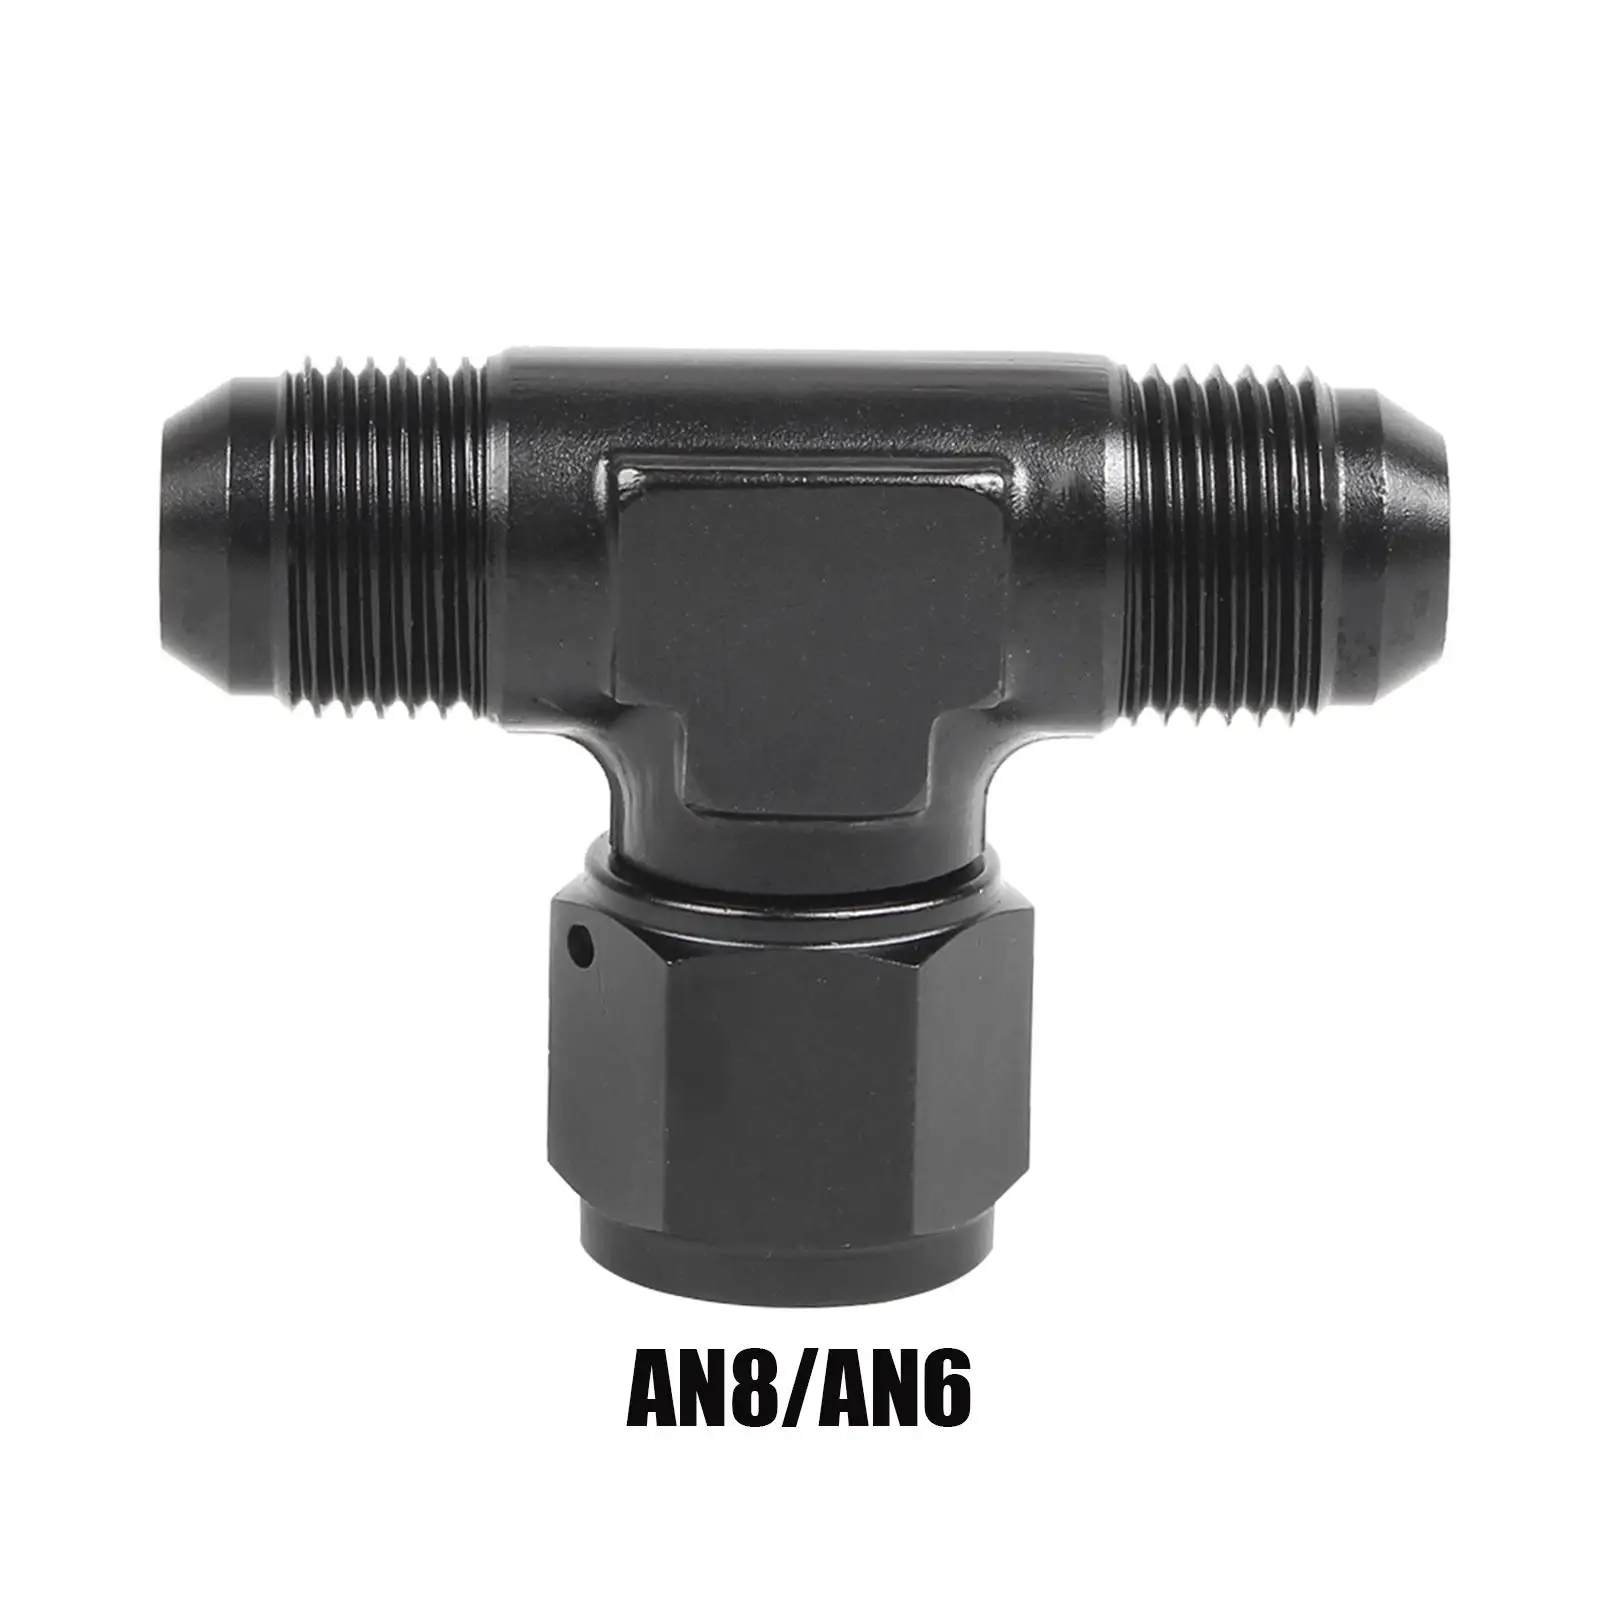 Automotive AN Male Tee Adapter Thread Oil Pipe Fittings Accessory